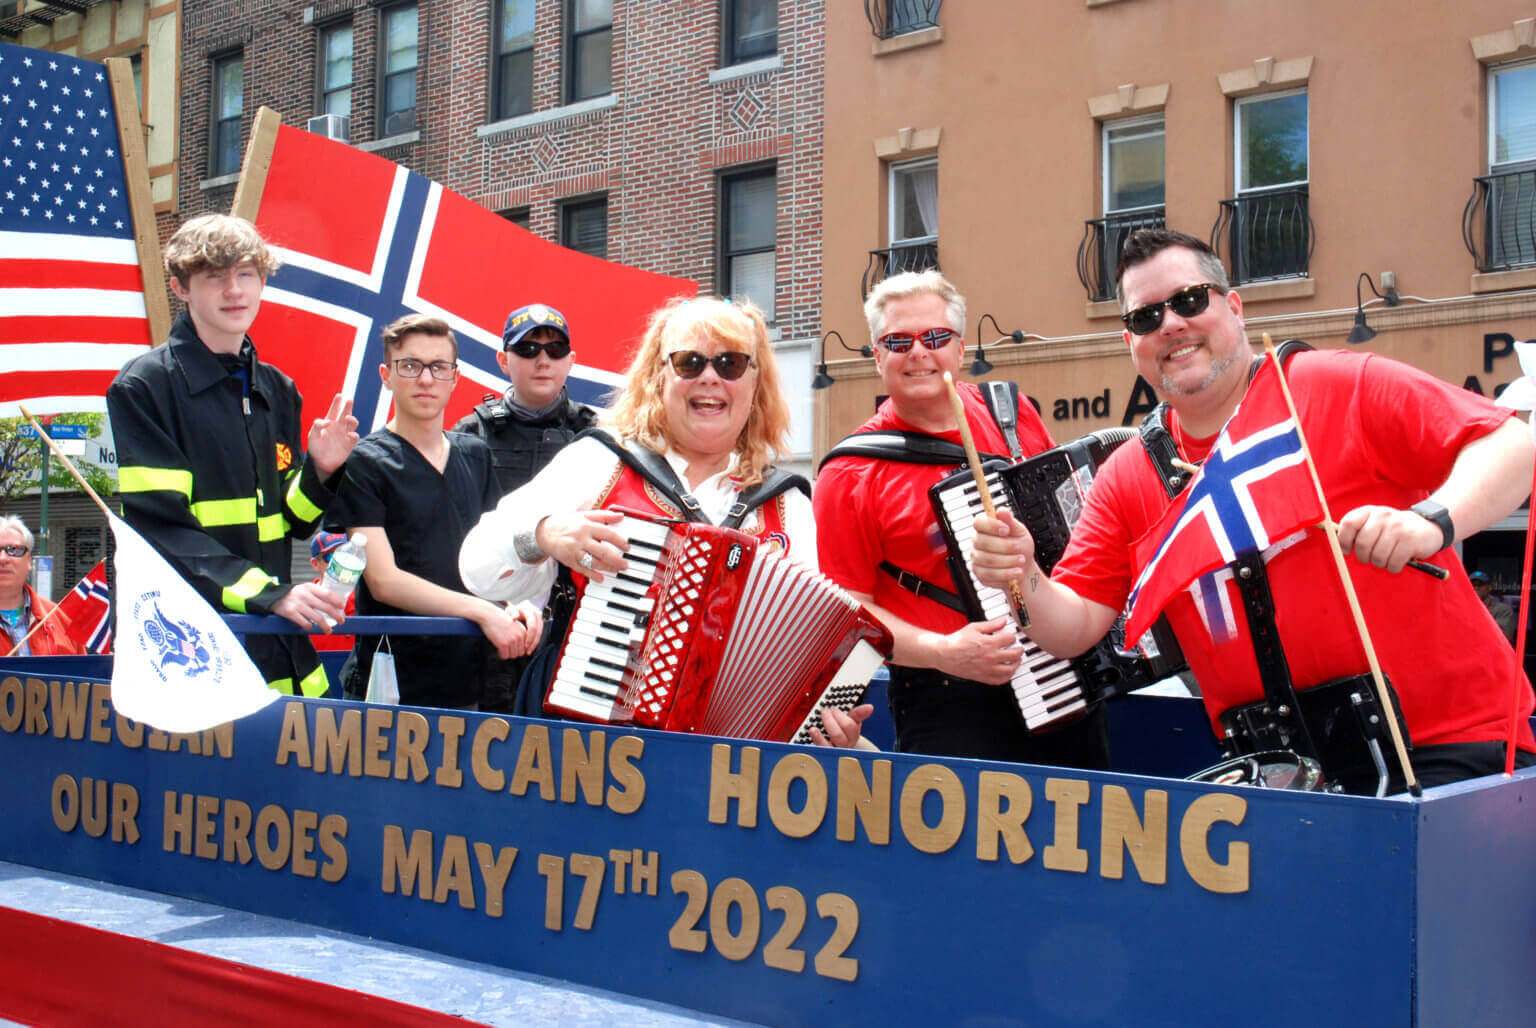 Viking Fest and Norwegian Day Parade return to Bay Ridge this weekend